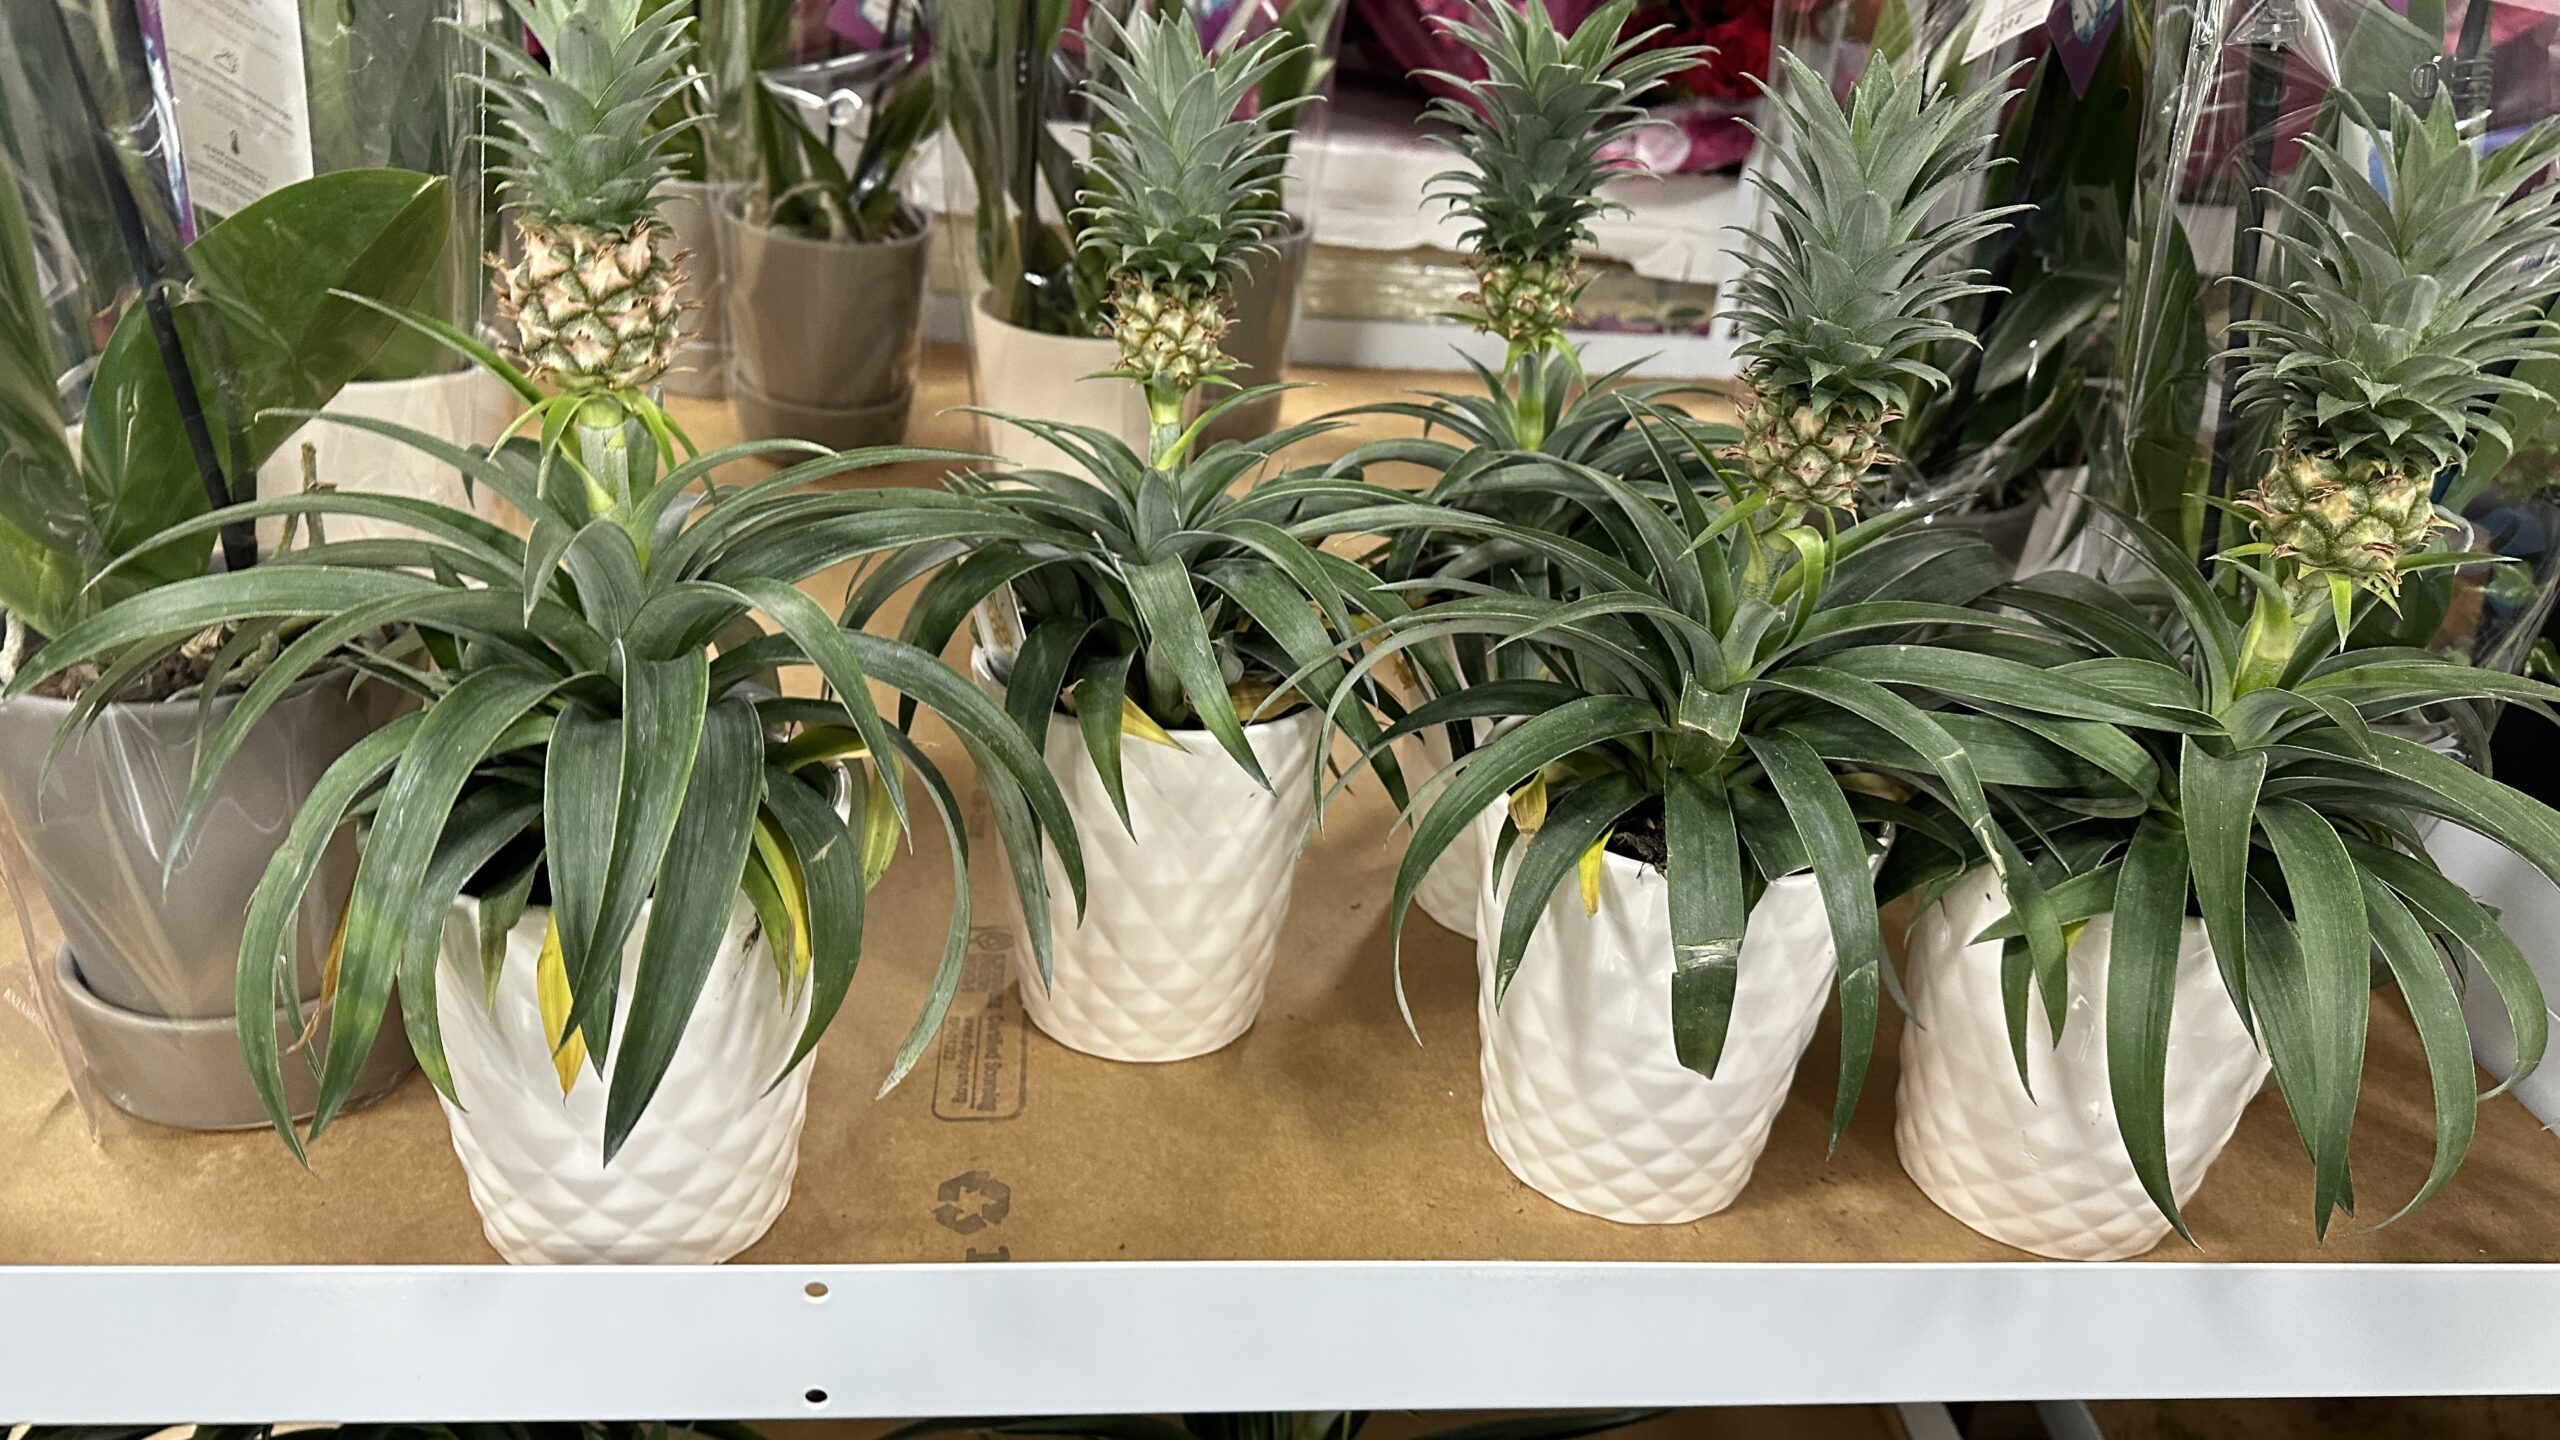 Sam’s Club is Selling Mini Pineapple Plants That Claim to Help You Stop Snoring